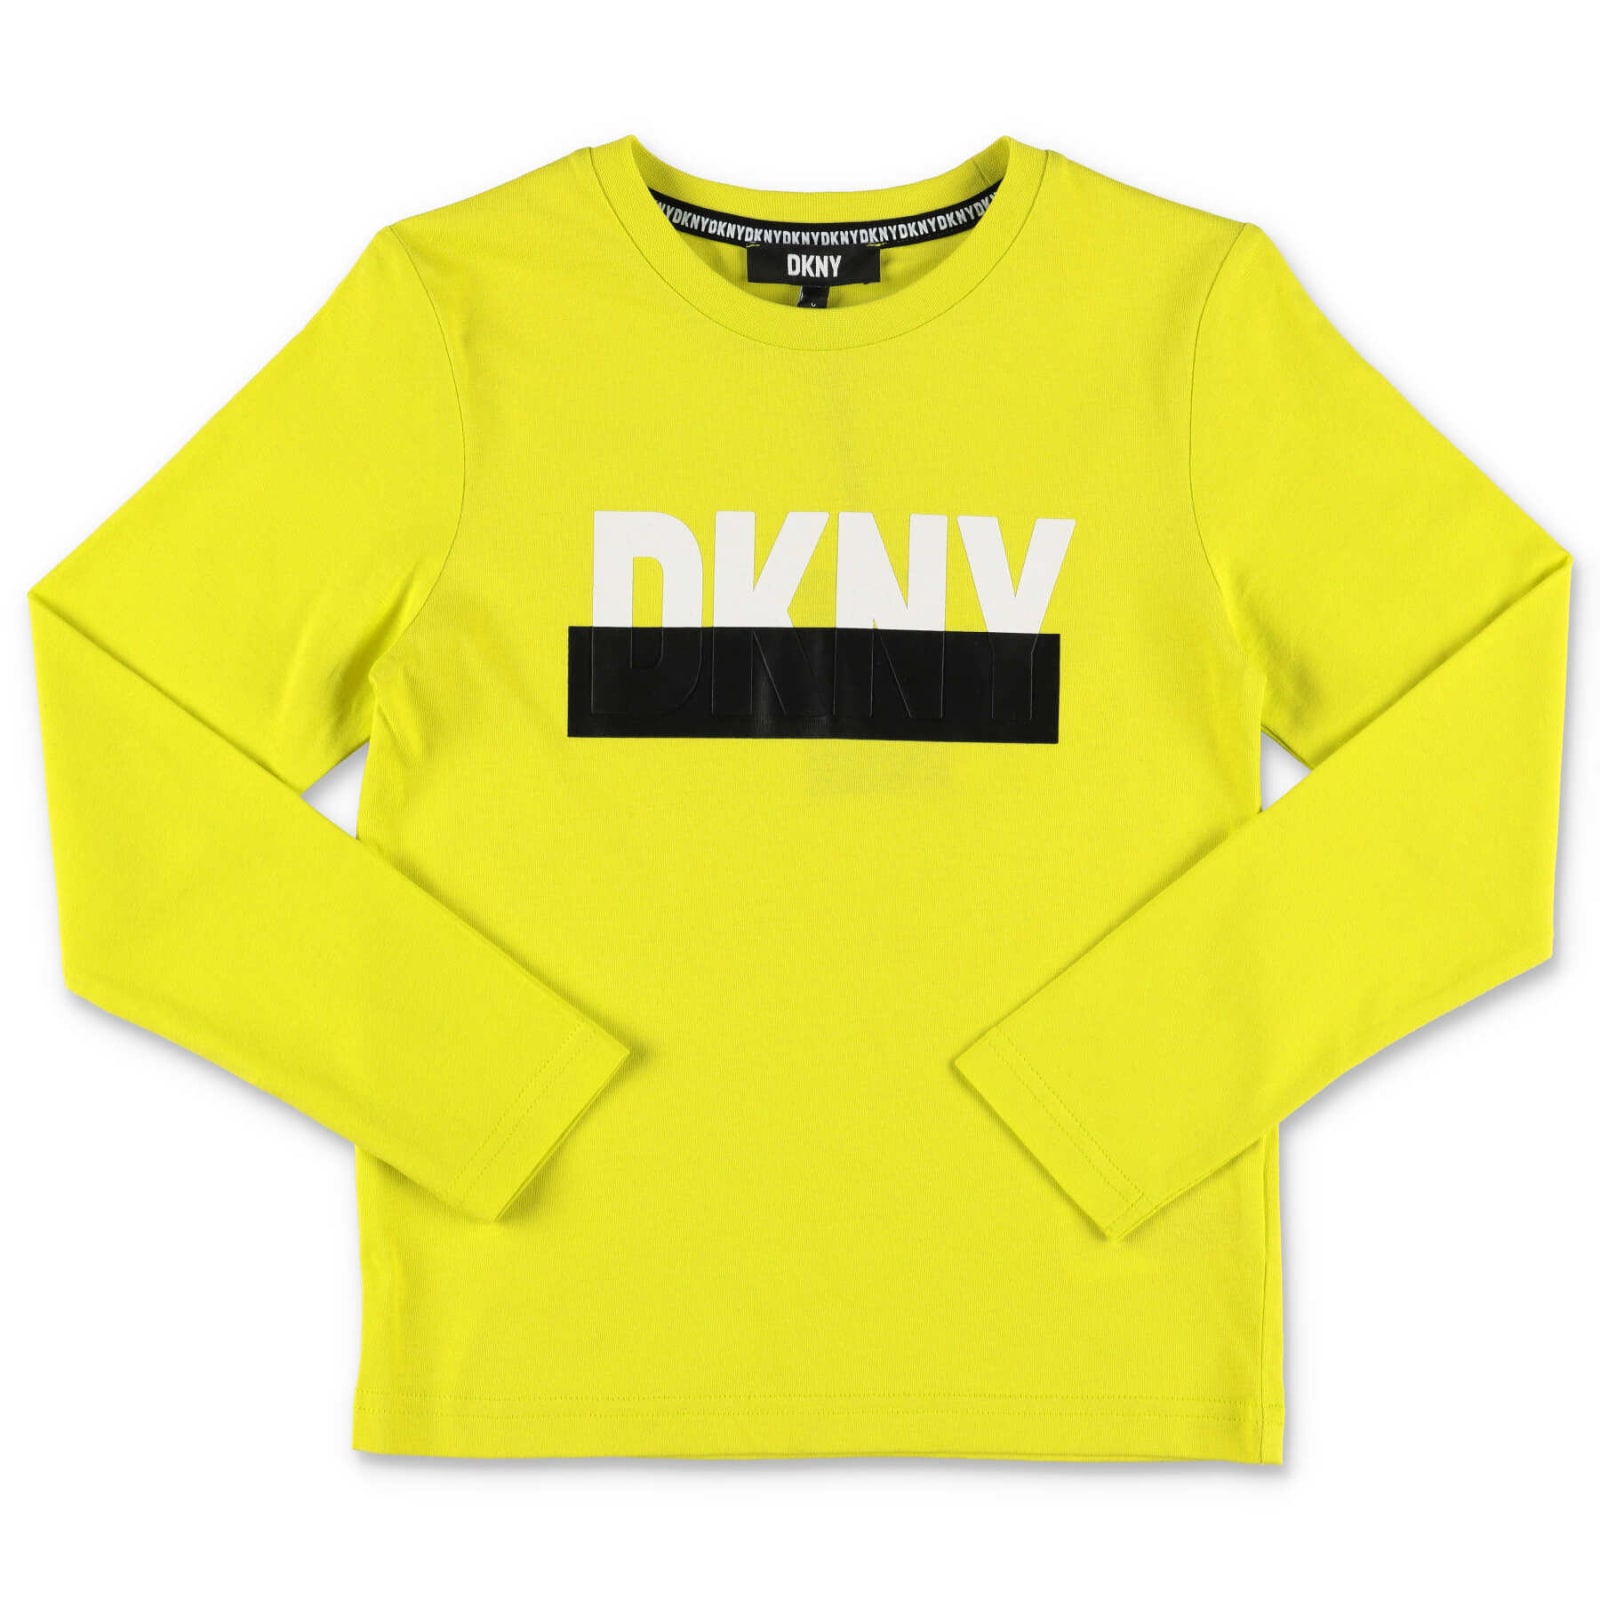 Dkny T-shirt Giallo Lime In Jersey Di Cotone